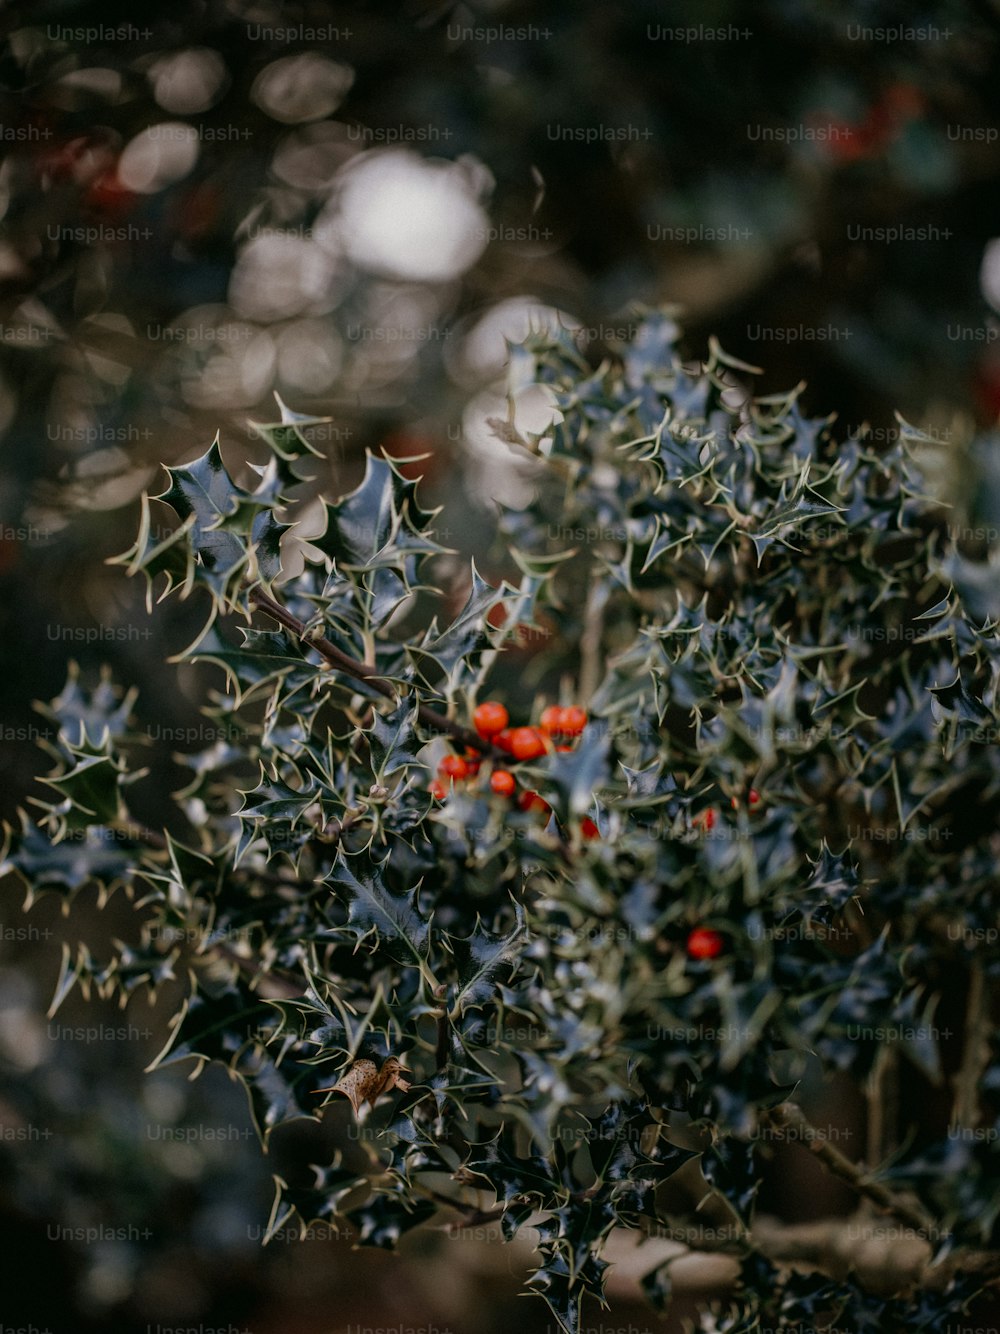 a close up of a bush with red berries on it